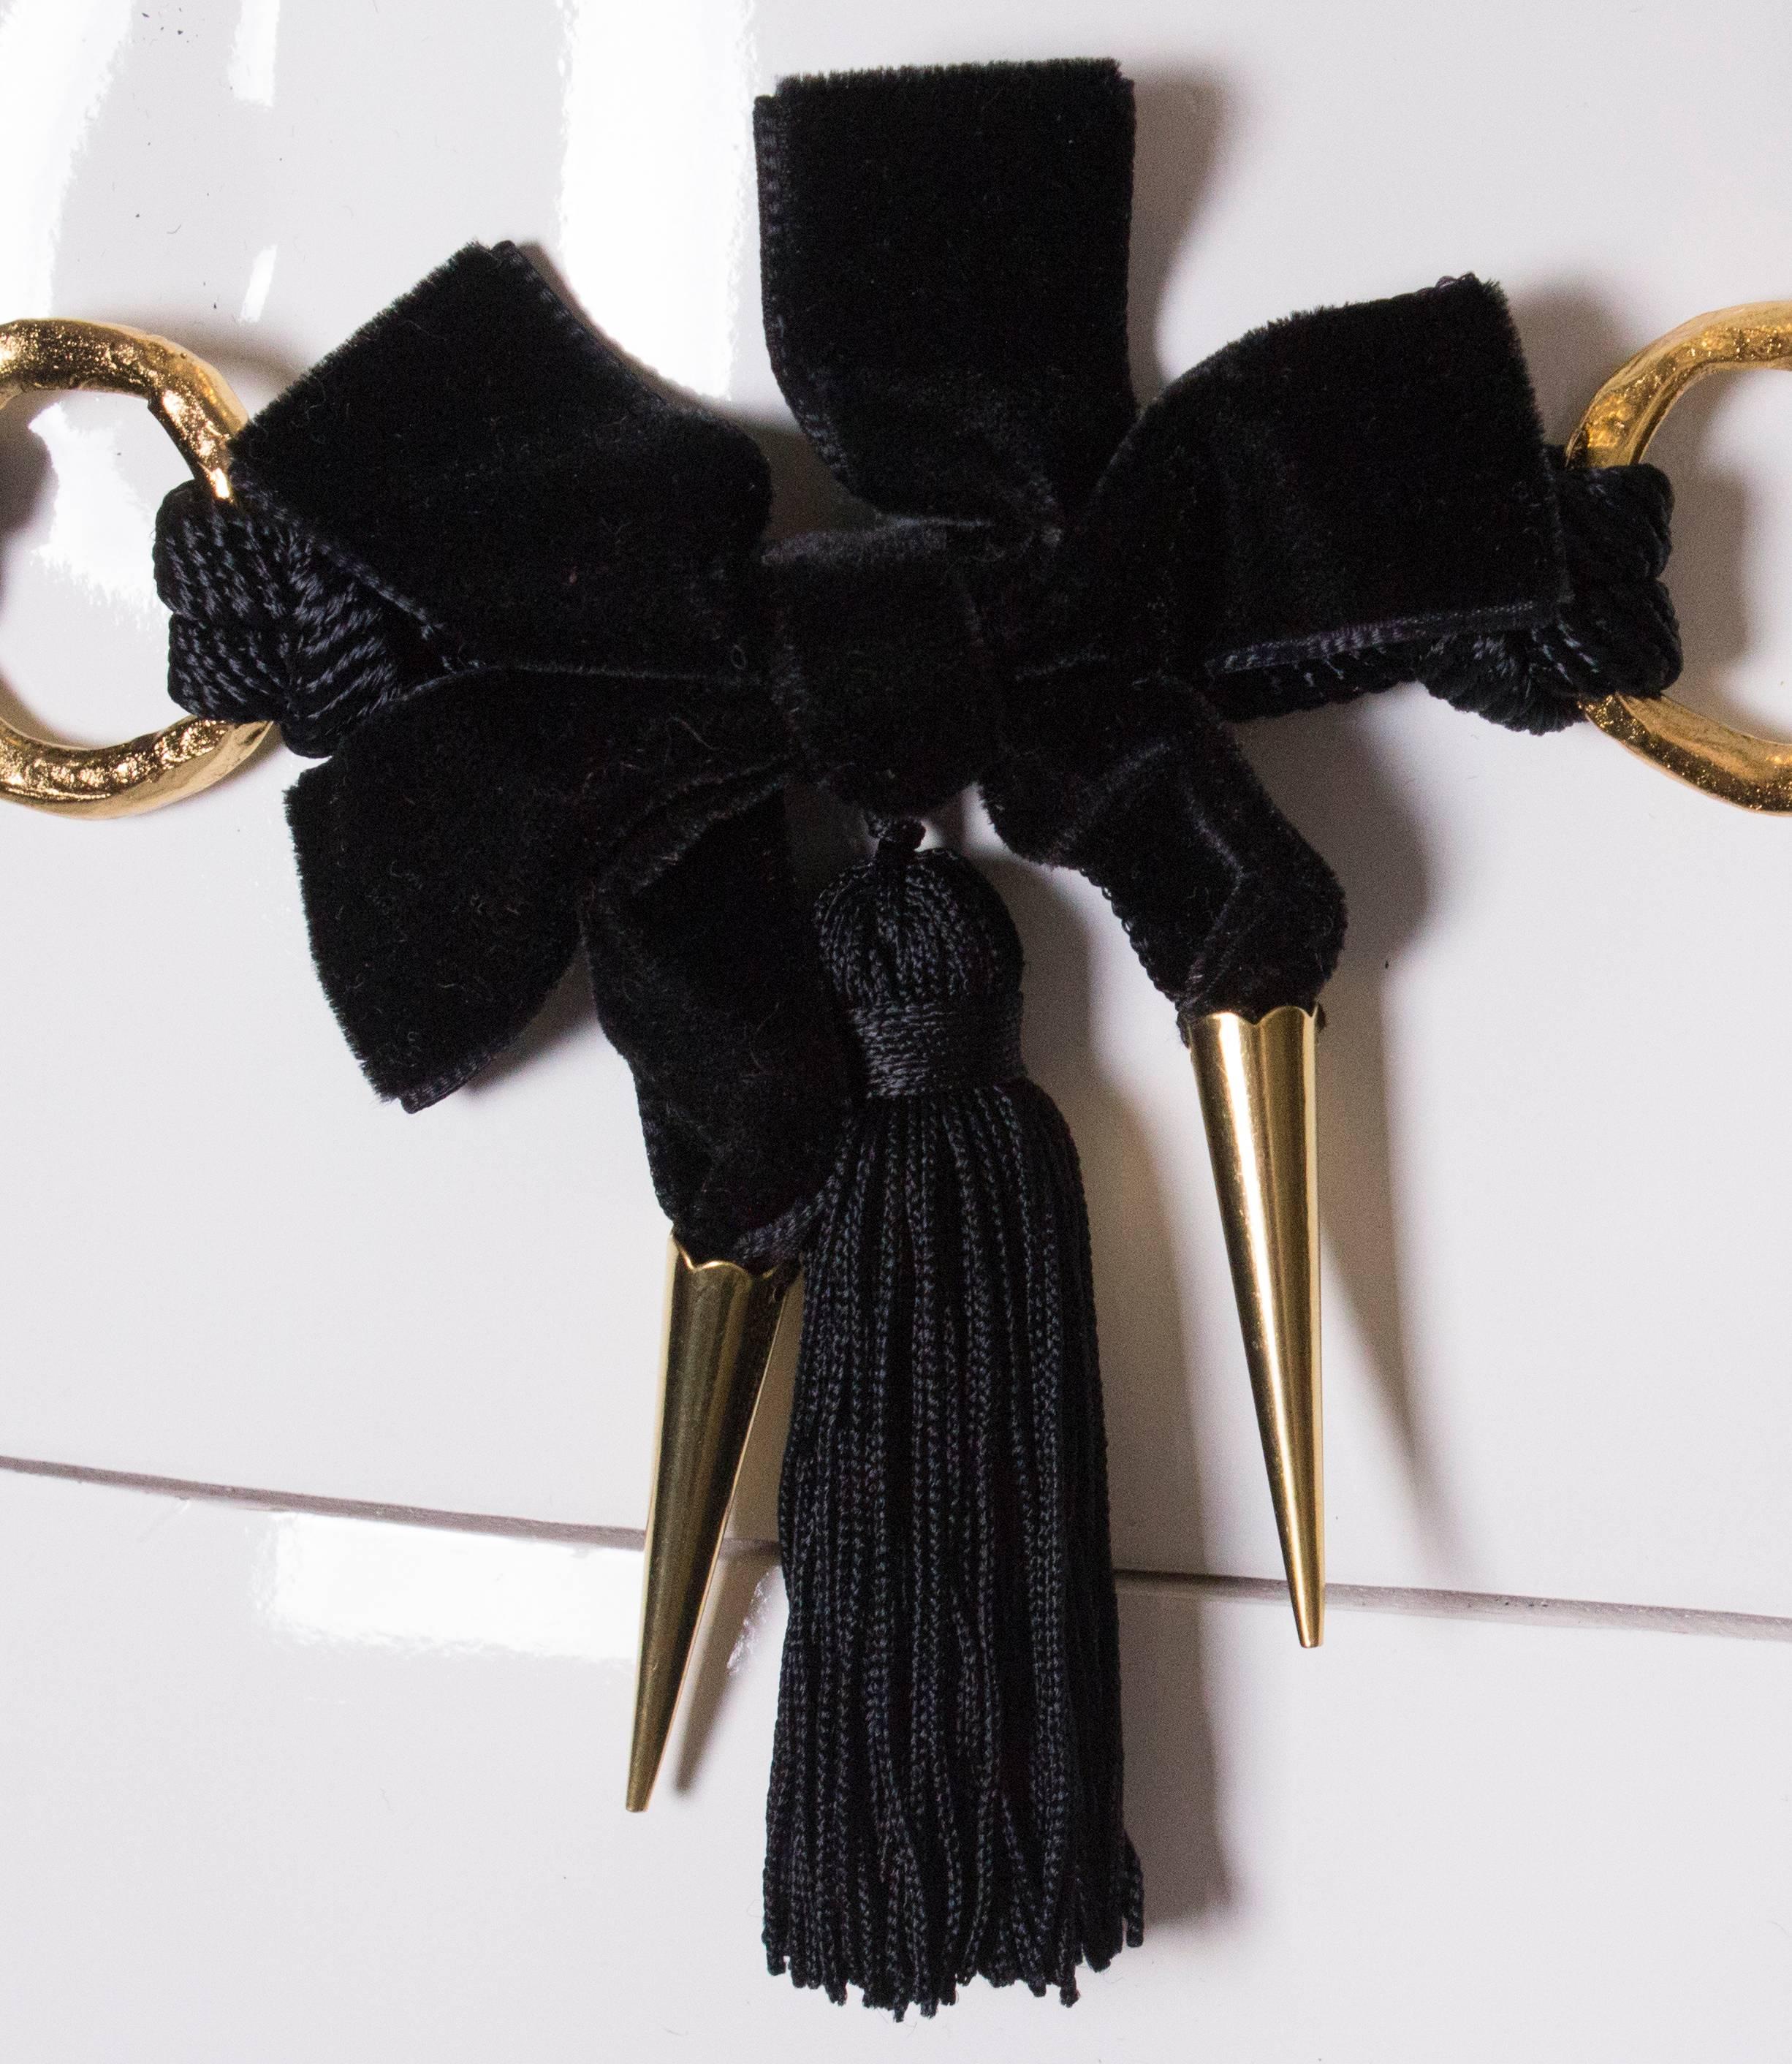 A great belt by Yves Saint Laurent. The belt is made of gold chain links with black velvet bows between each link. The bow have a tassle and two pointers below each bow. At the end of the body of the belt is a double cord 20'' in length. The total